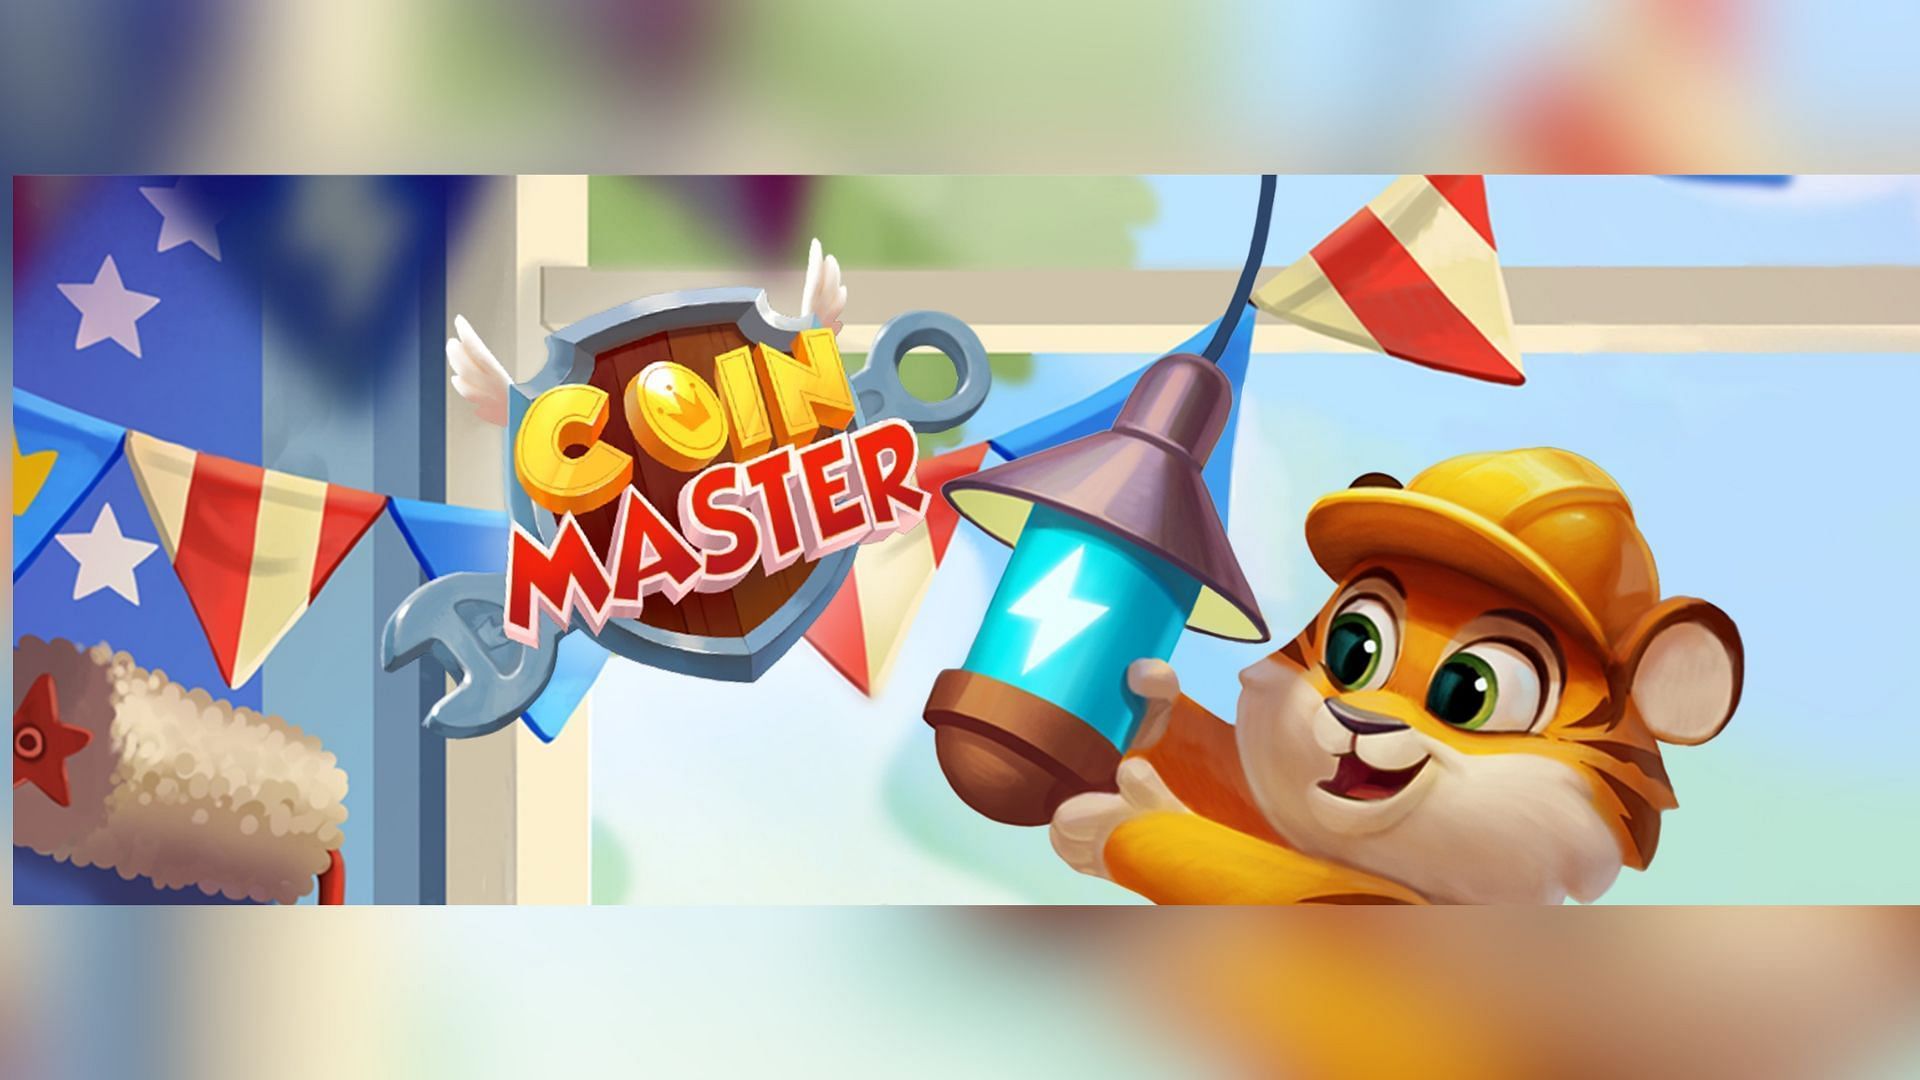 coin master daily free spins links